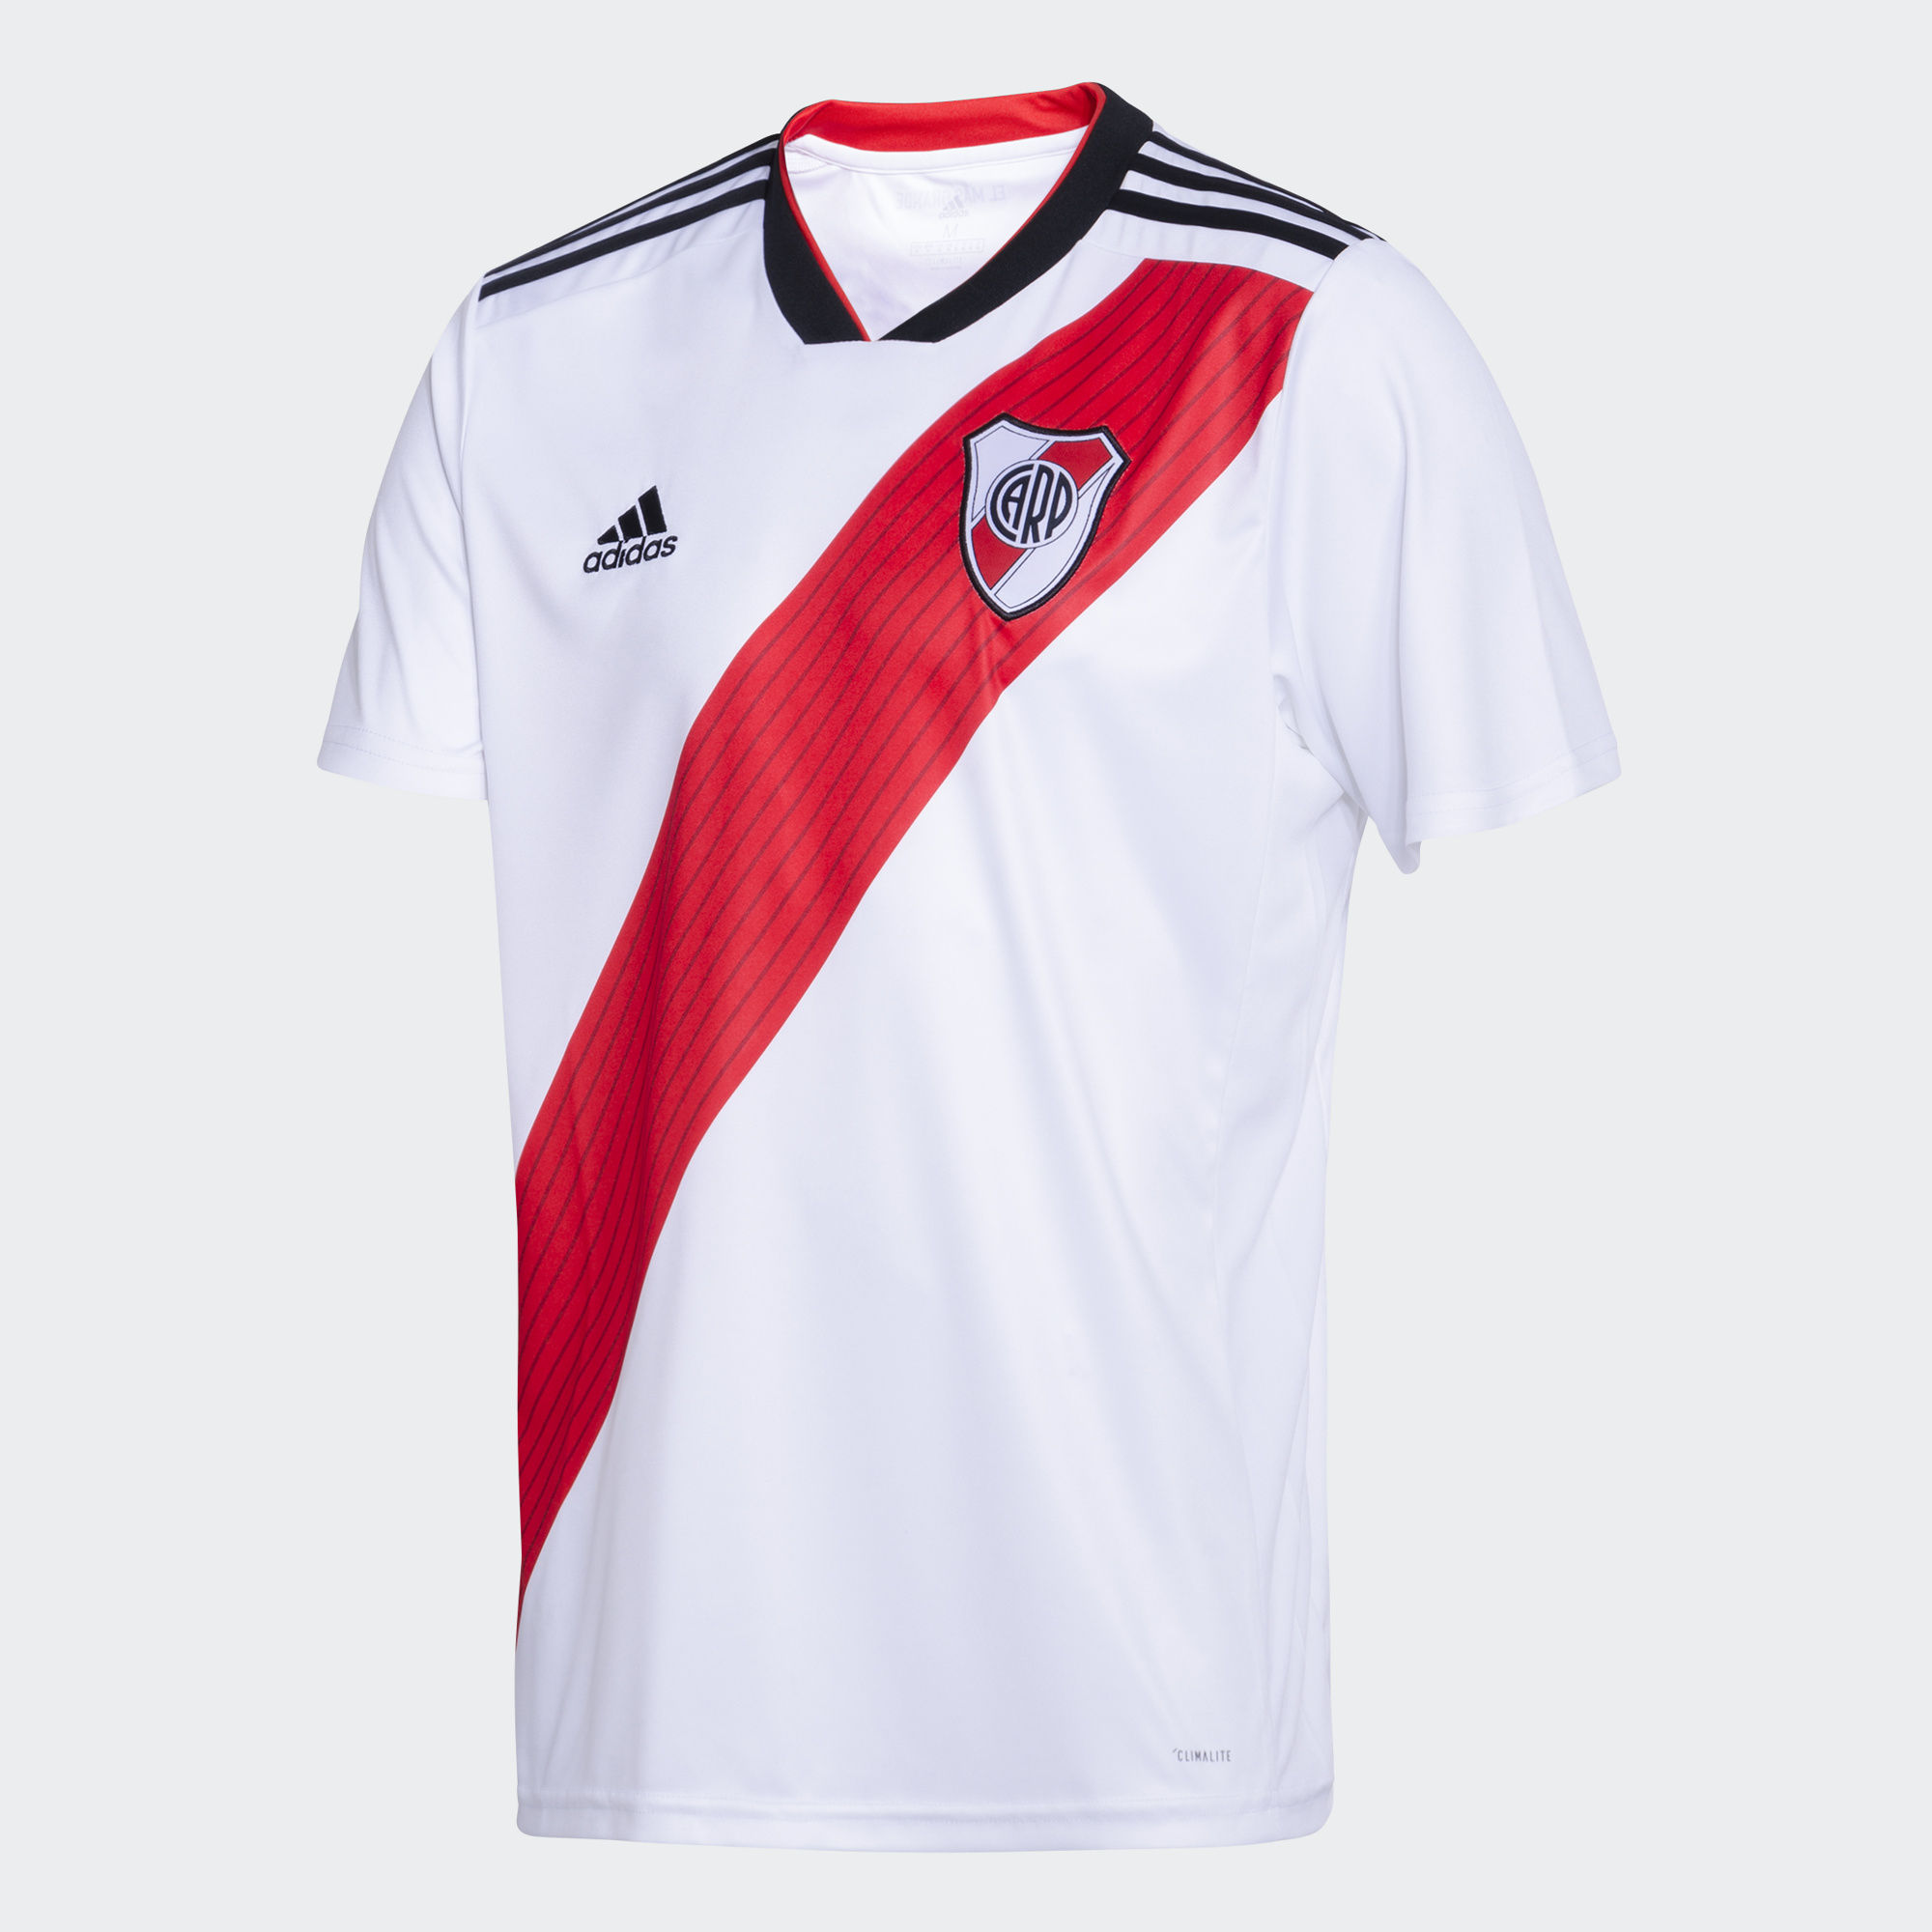 River Plate Reveal Their 2018/19 Home Kit by Adidas